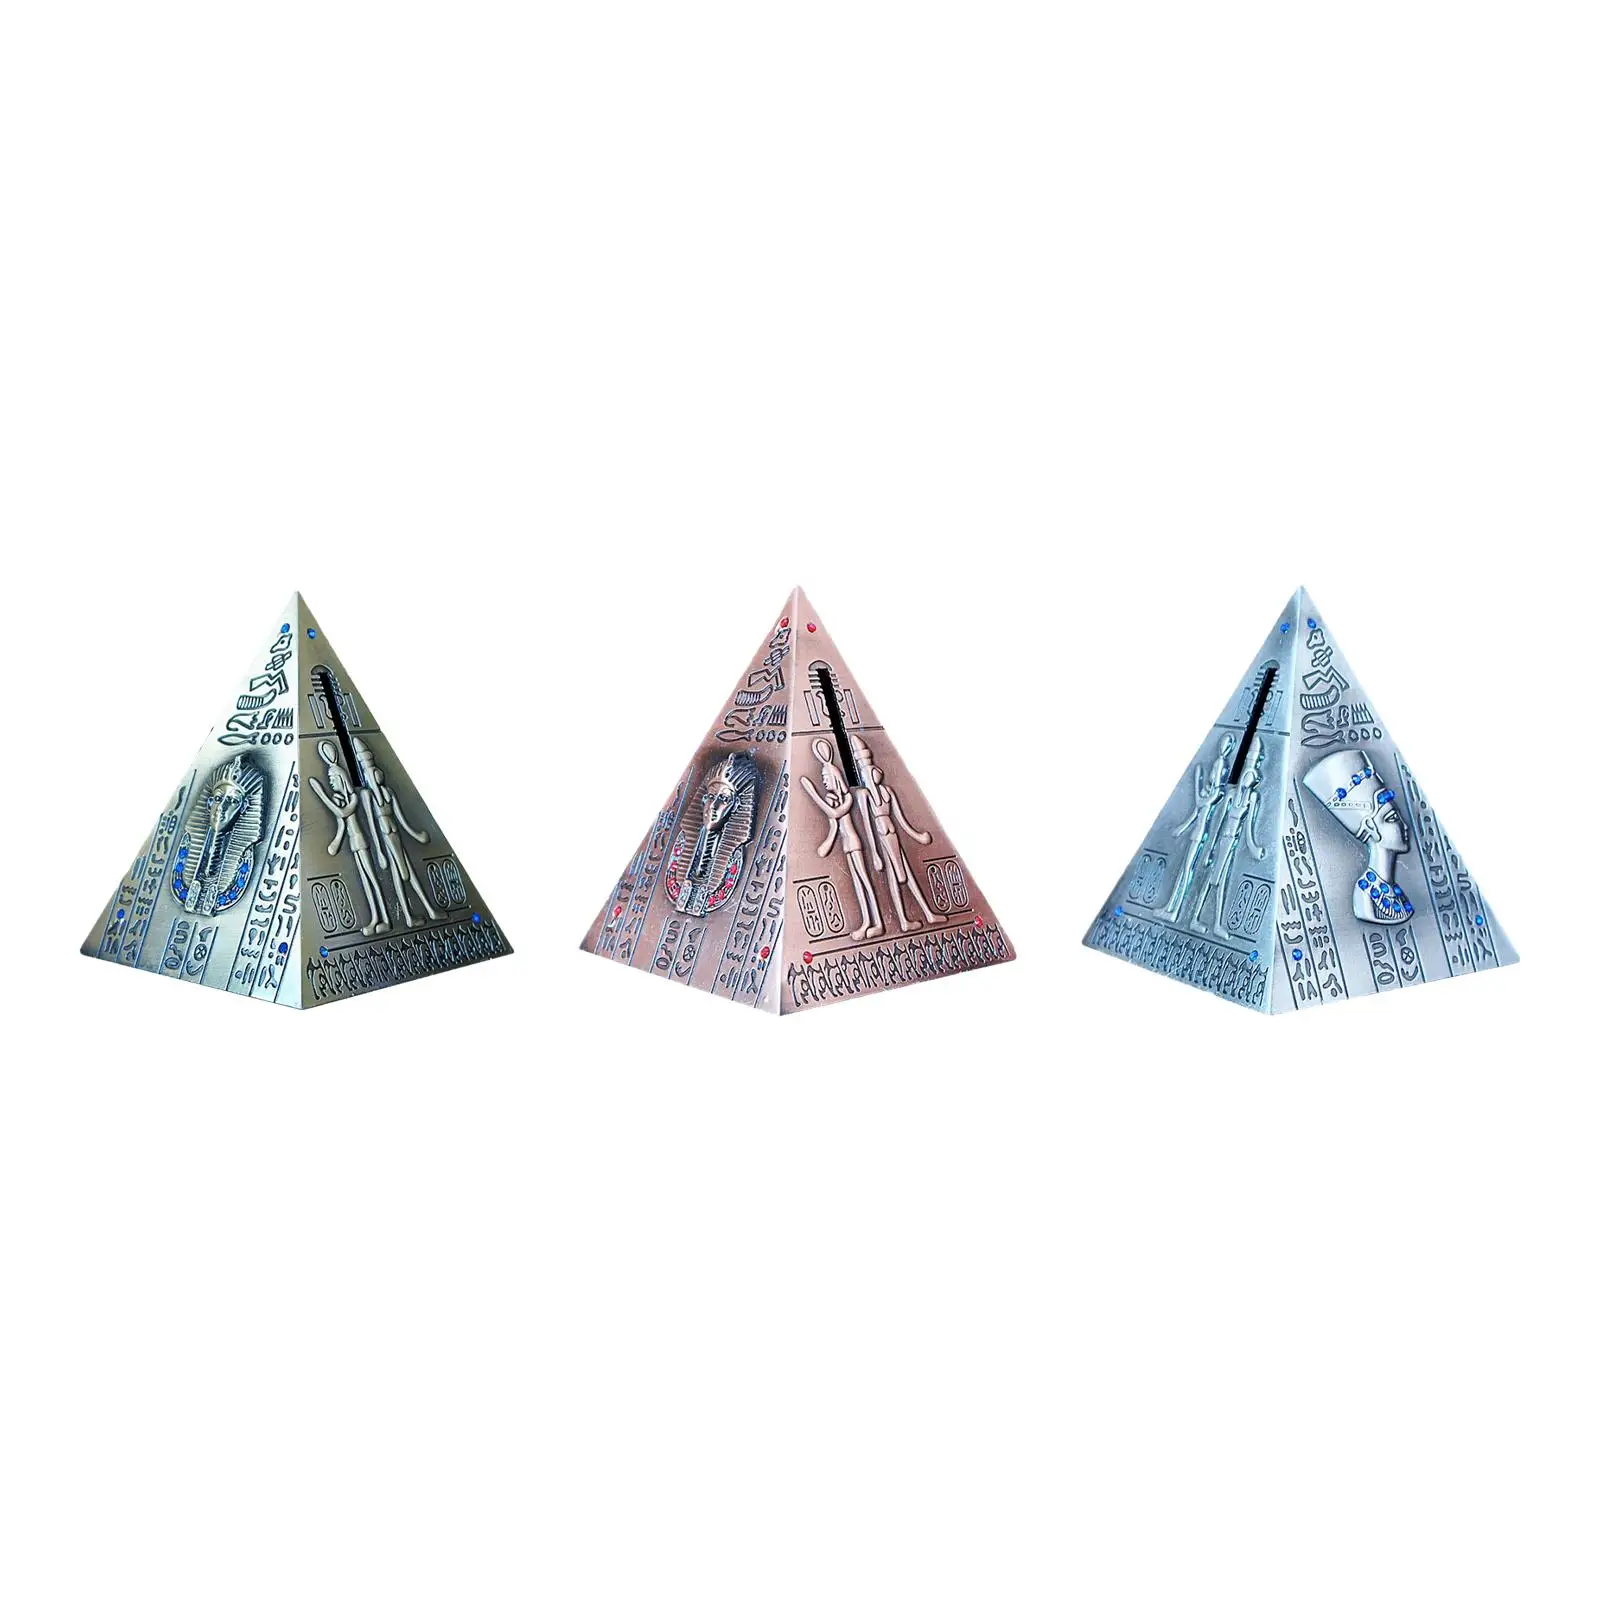 Pyramid Box Collection Small Trinkets Box Desktop Ornament Collectible for Birthday Kids and Adults Wedding Party Gift